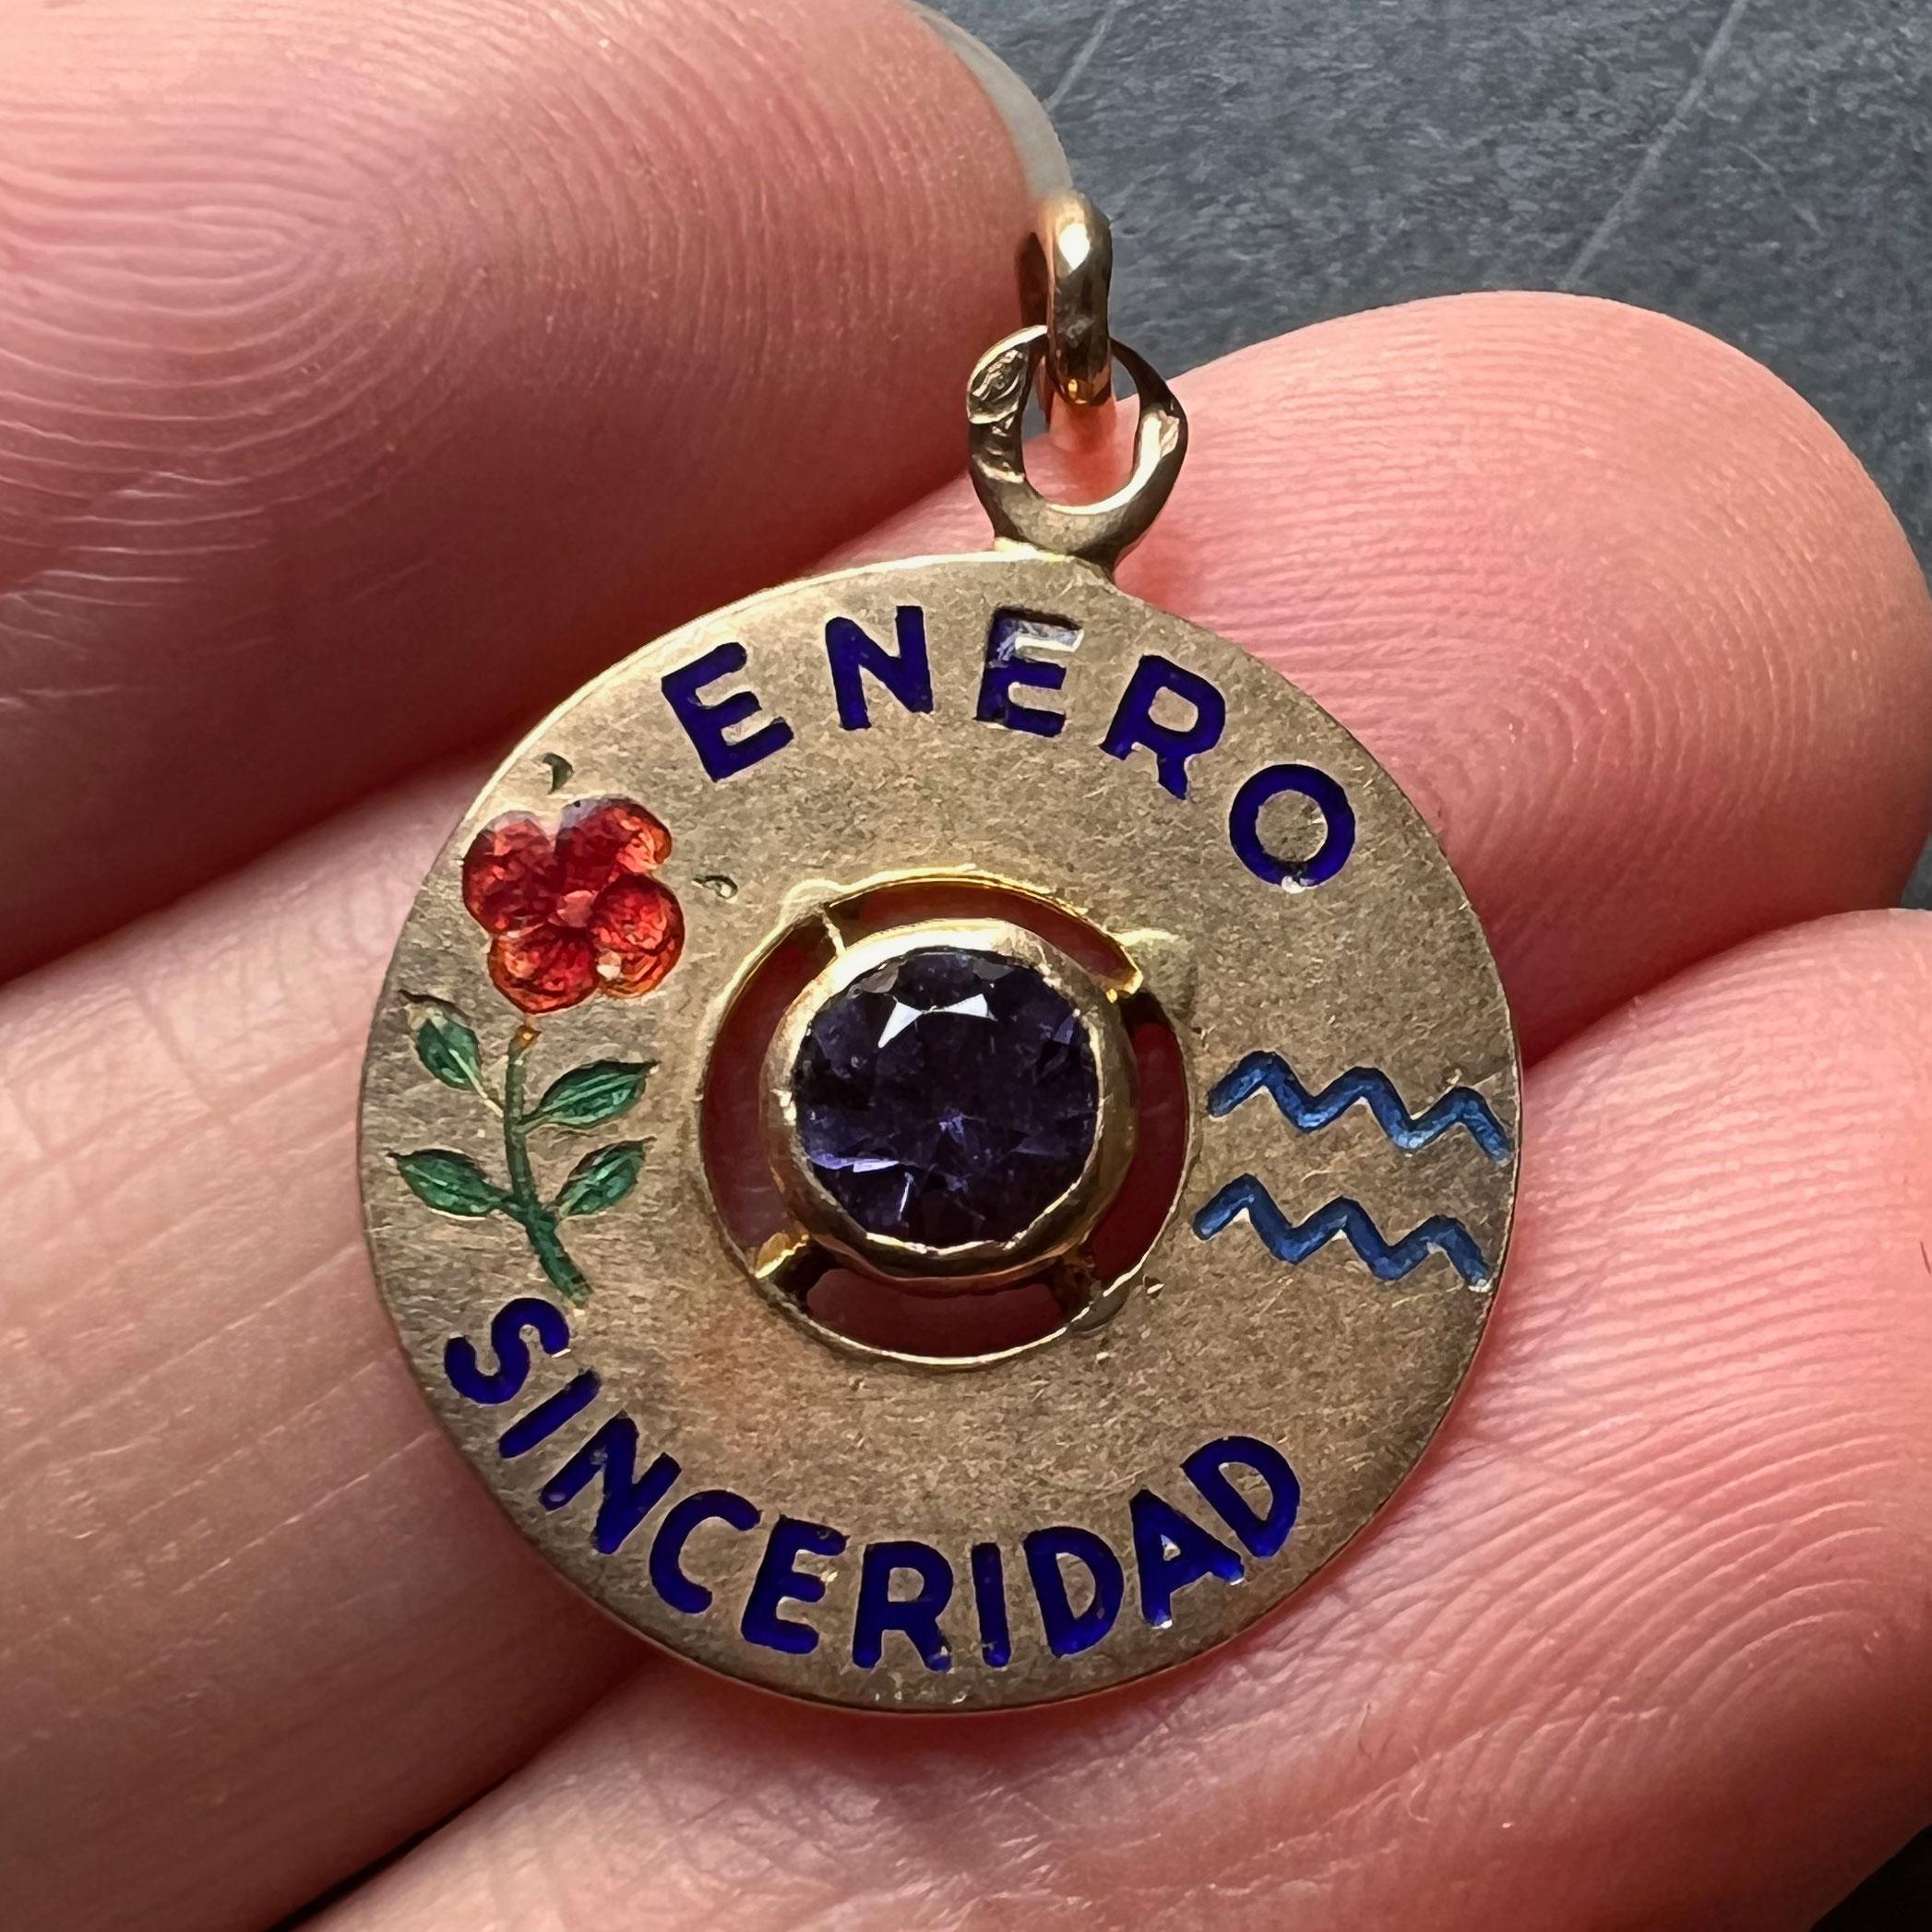 An 18 karat yellow gold charm pendant designed as a gold disc with enamel inlay of 'ENERO SINCERIDAD' (January Sincerity) with the zodiac symbol for Aquarius and a carnation (symbolising devotion, loyalty and love) in enamel, and set to the centre